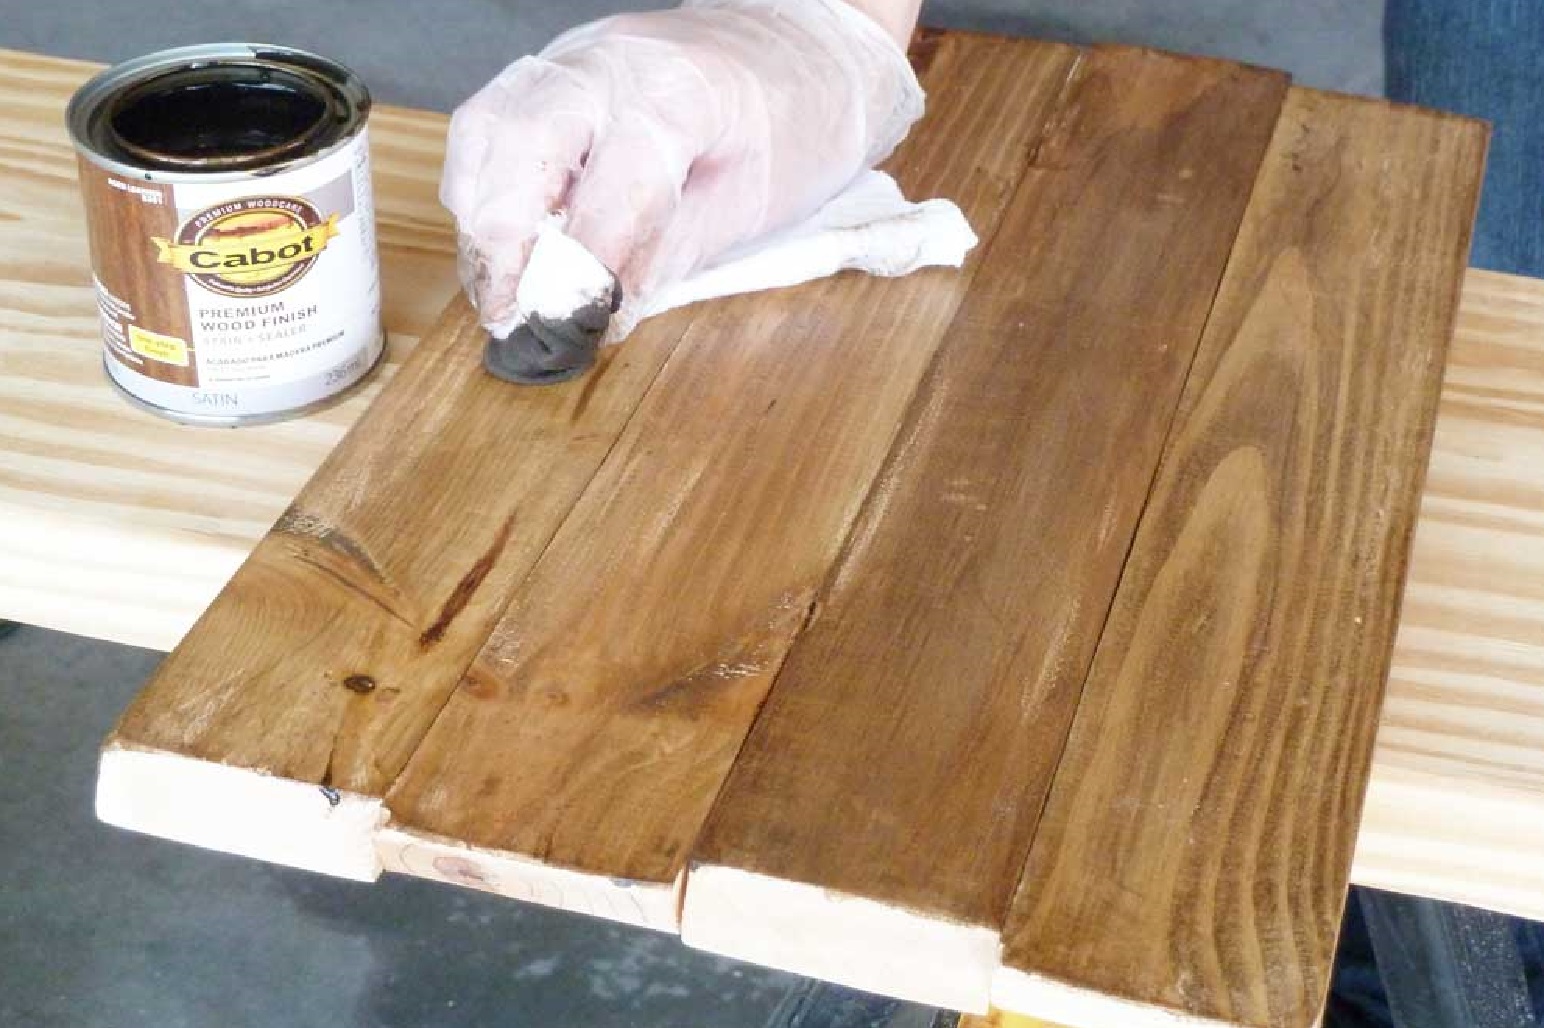 7 Types of Wood Stain – Description & Uses